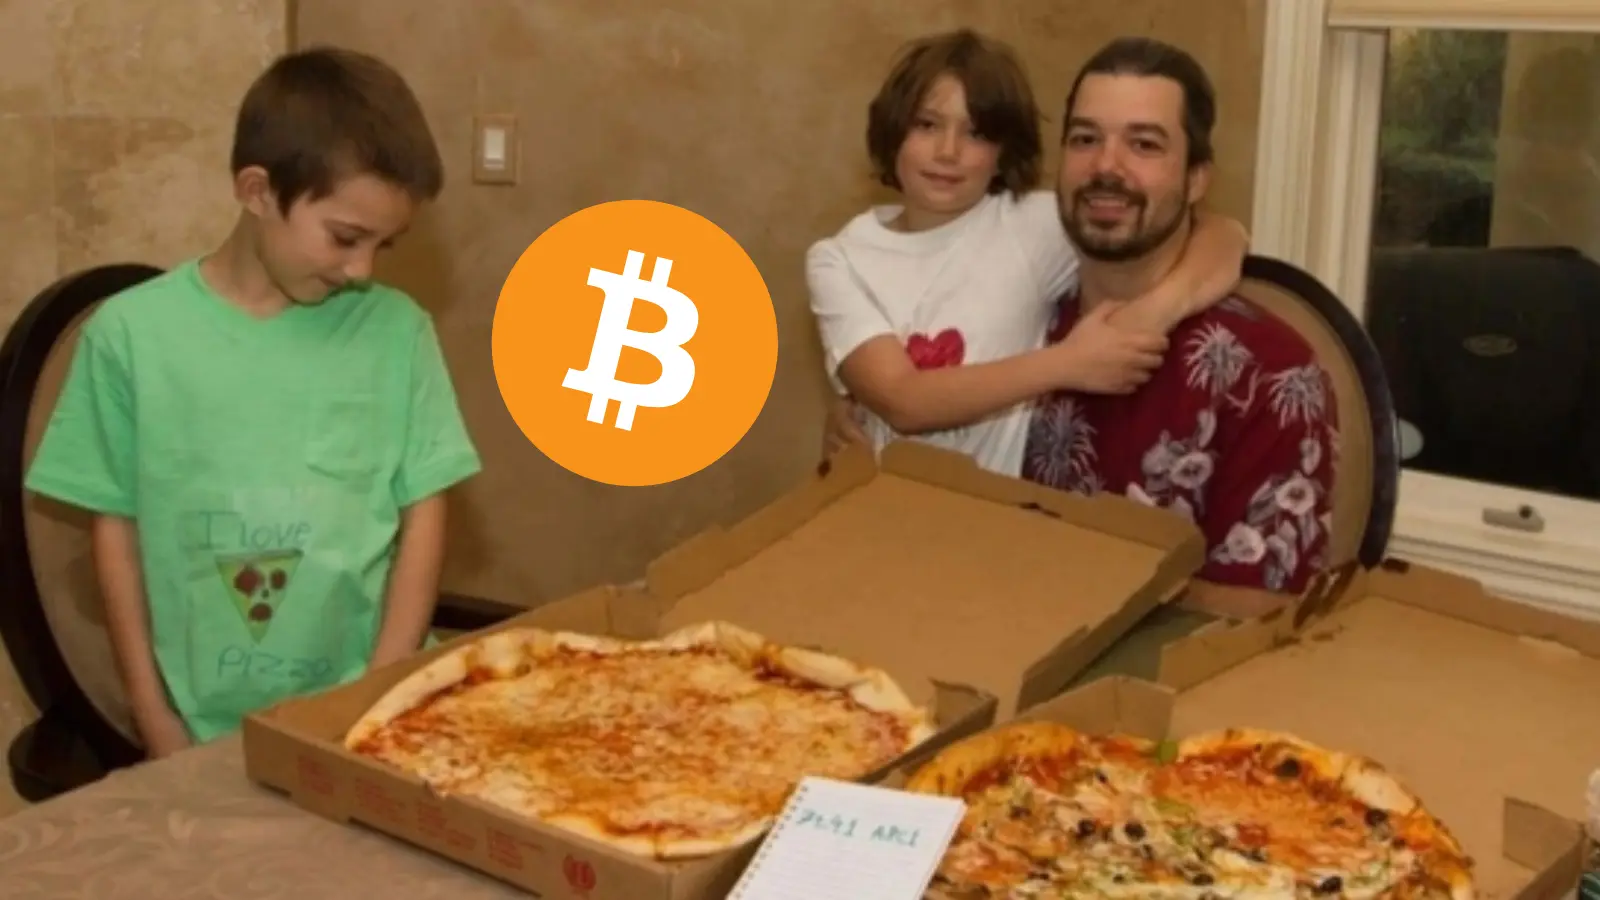 A photo of the Bitcoin event: Bitcoin Pizza Day: The First Commercial Bitcoin Transaction